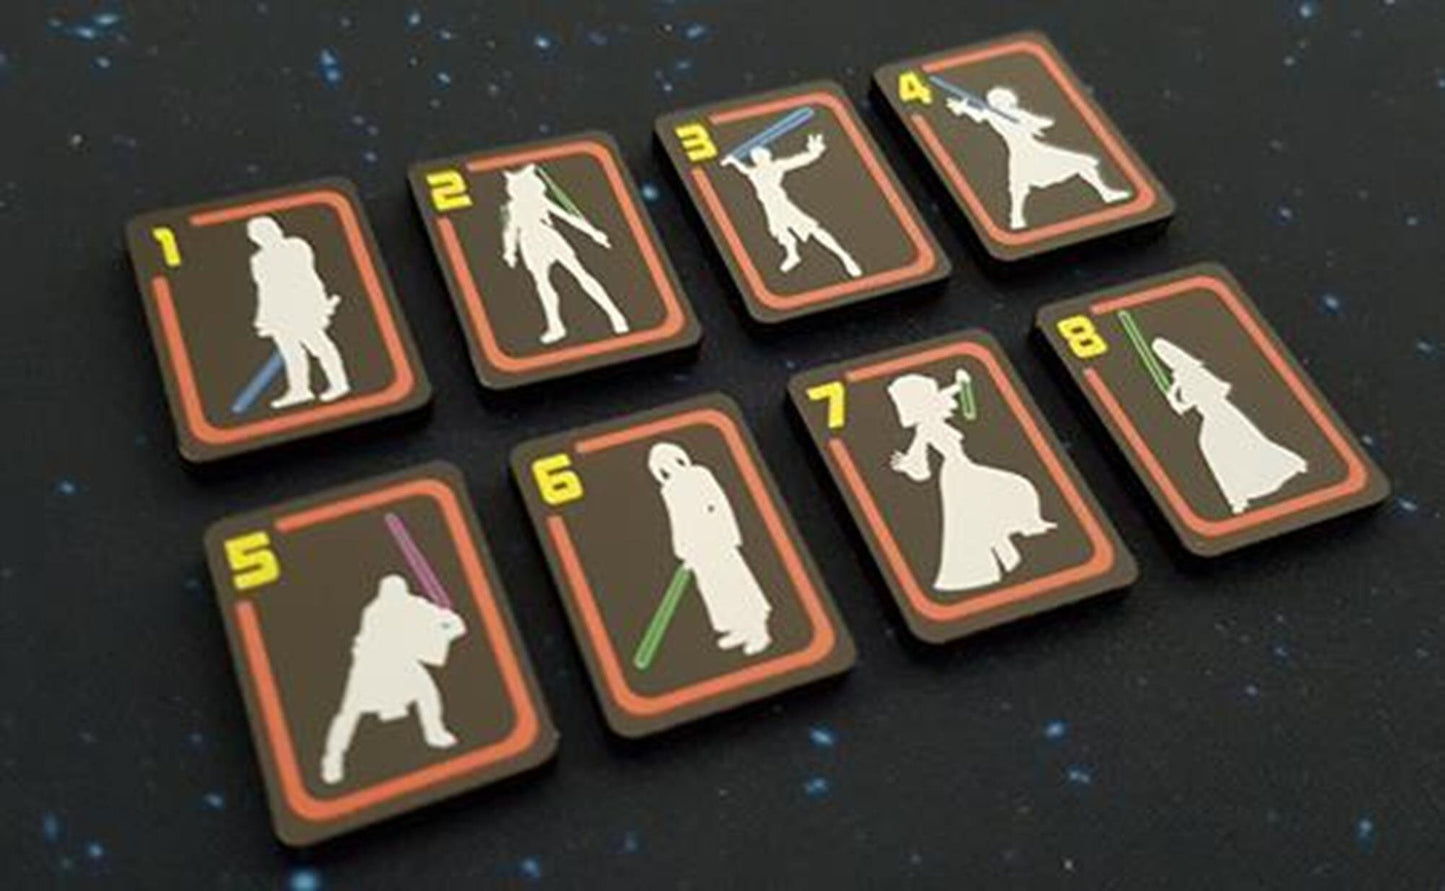 V2 Acrylic Colour Printed Jedi Target Lock Tokens 1 - 8 for Star Wars X-Wing